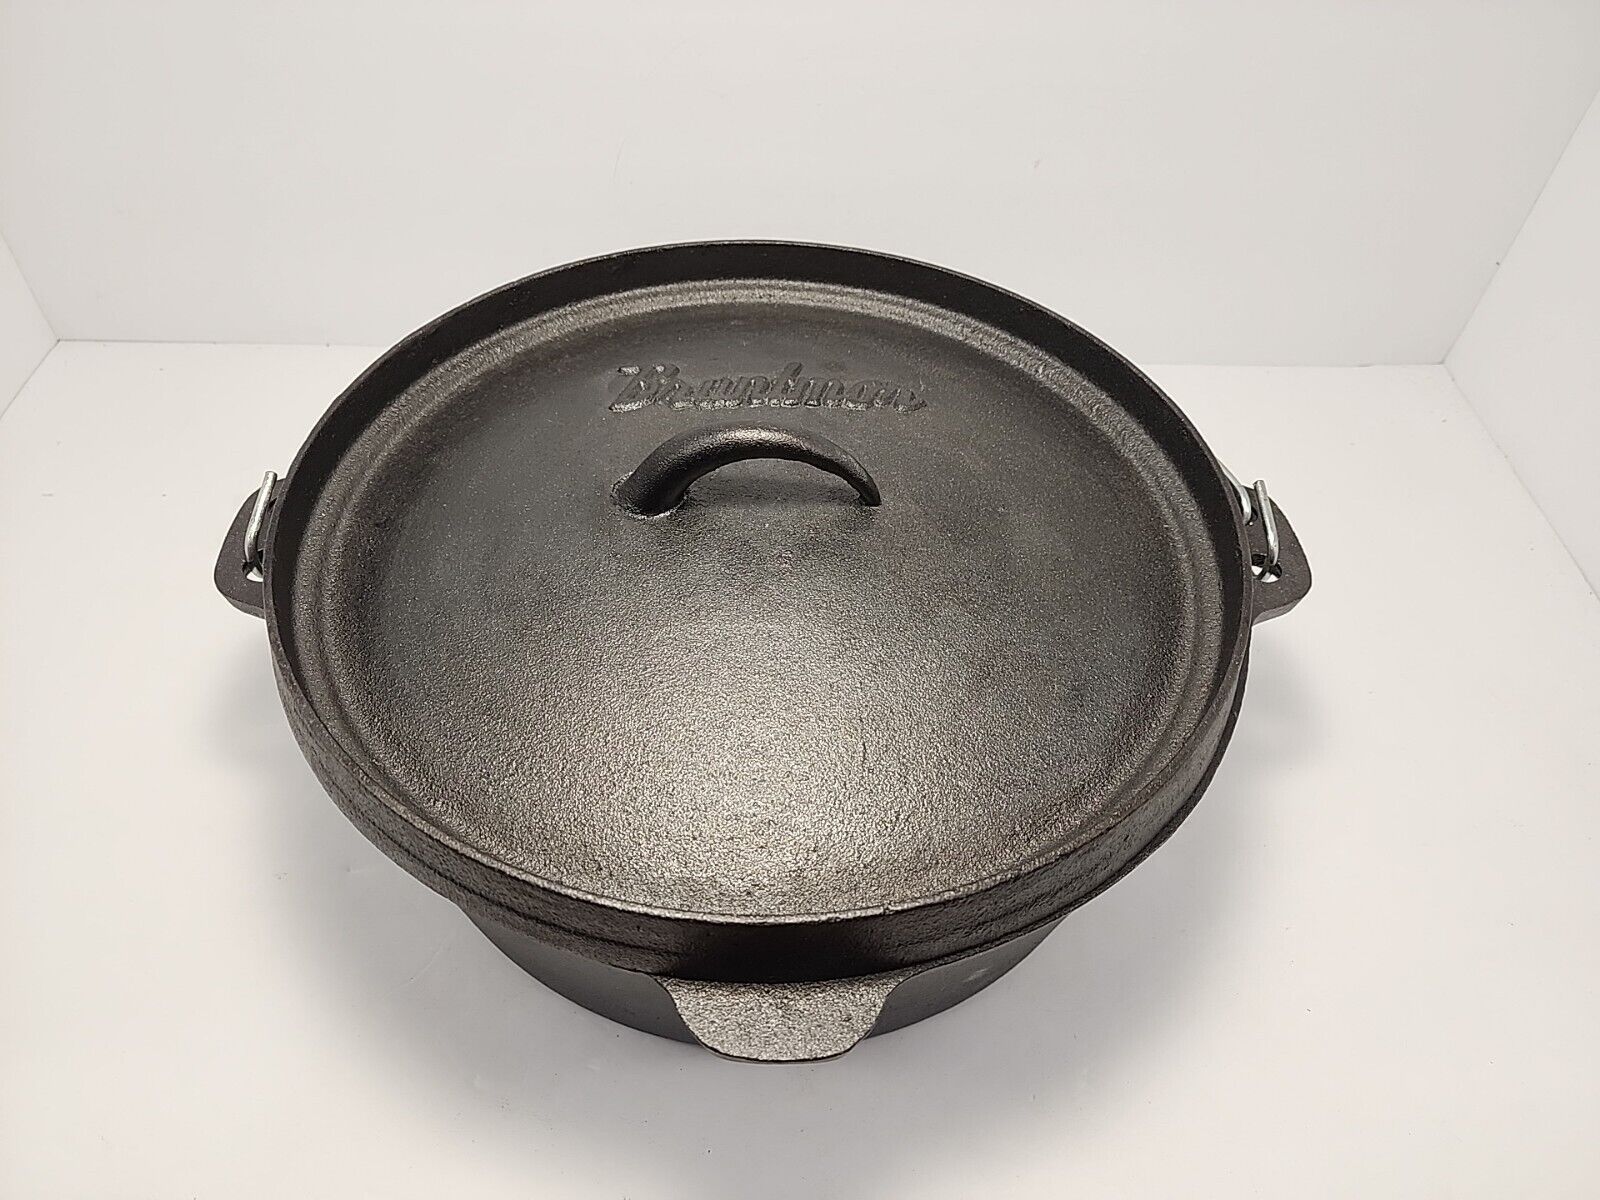 Bruntmor Pre-Seasoned Cast Iron Dutch Oven with Flanged Lid Cover, Camping Camp